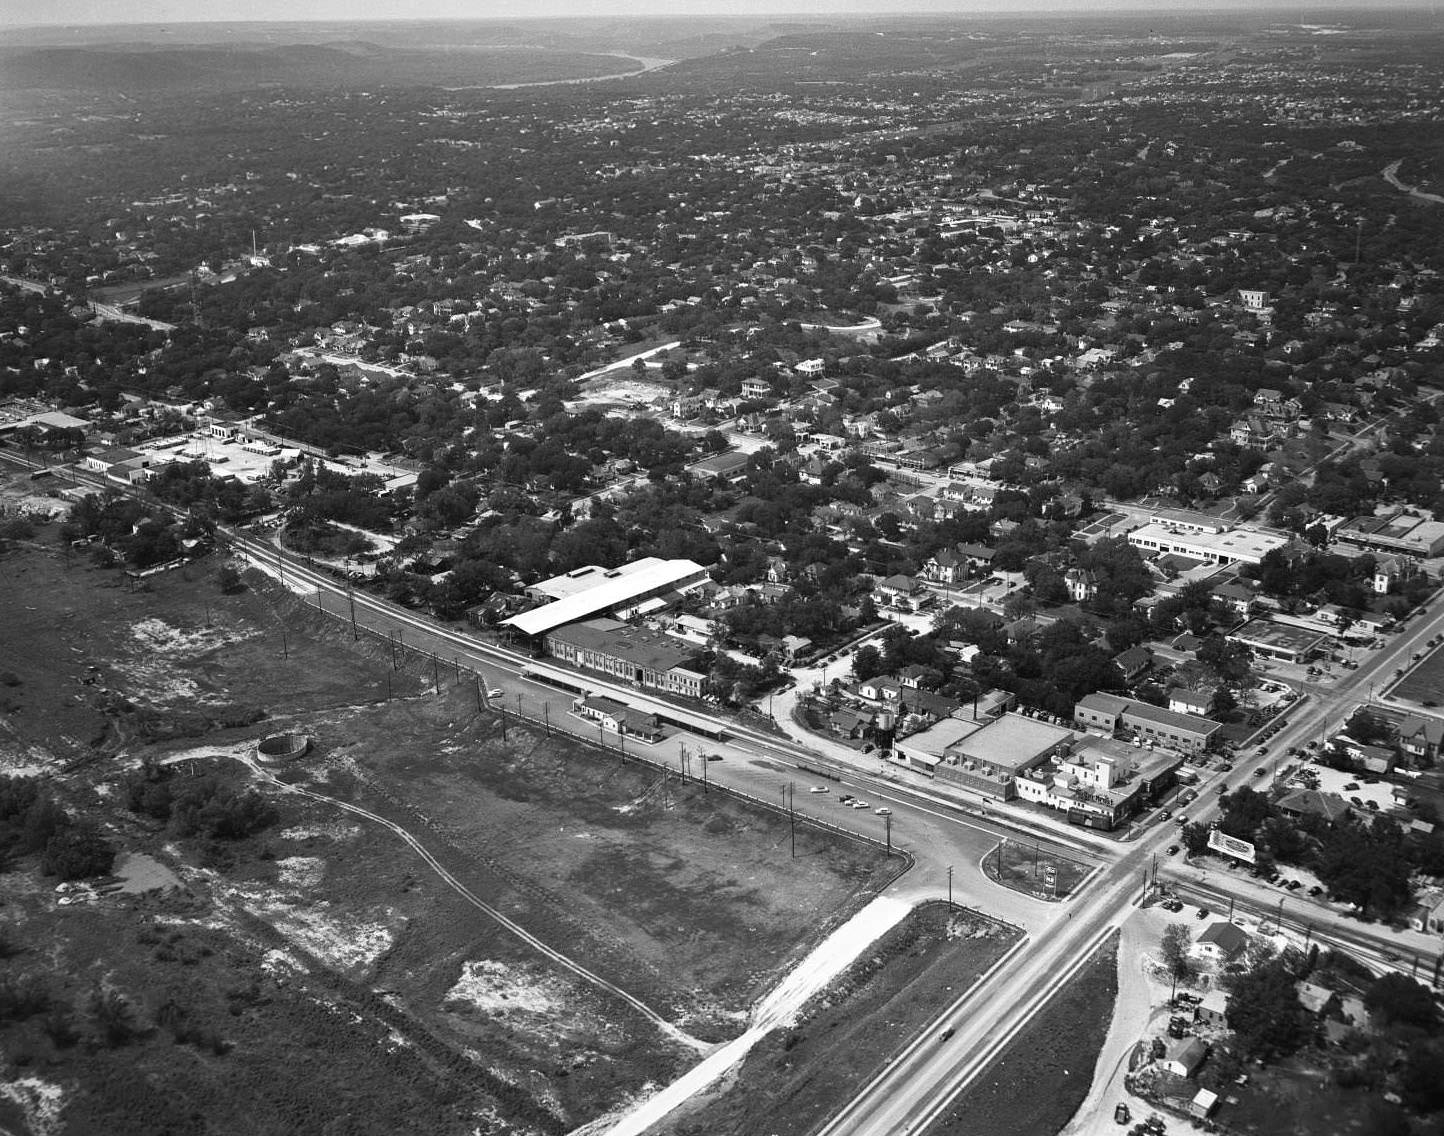 Looking NW from about the north approach from Lamar bridge, 1950